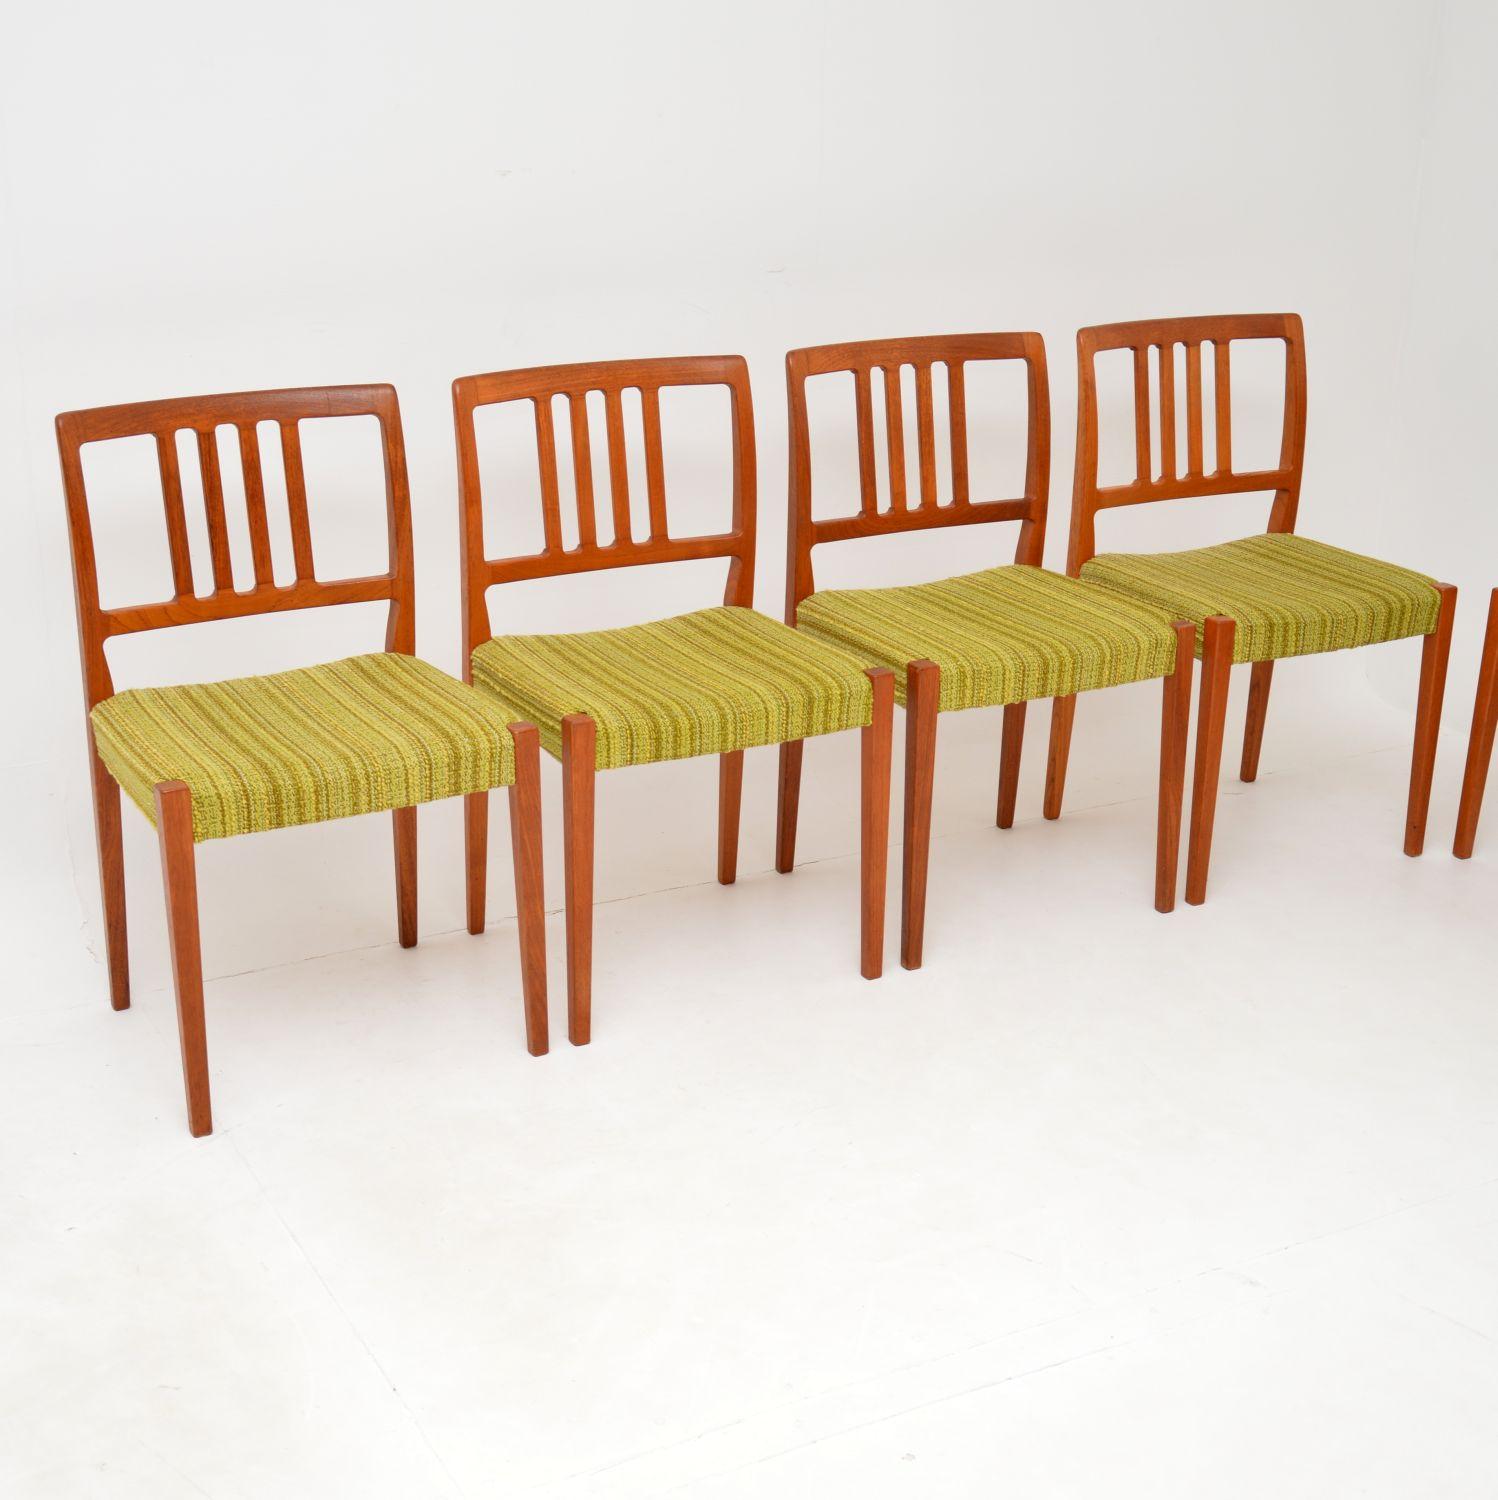 A beautiful set of eight vintage solid teak dining chairs. These were made in Sweden in the 1960’s, they were designed by Nils Jonsson for Hugo Troeds.

The quality is fantastic, these are very strong and very comfortable. The solid teak frames have